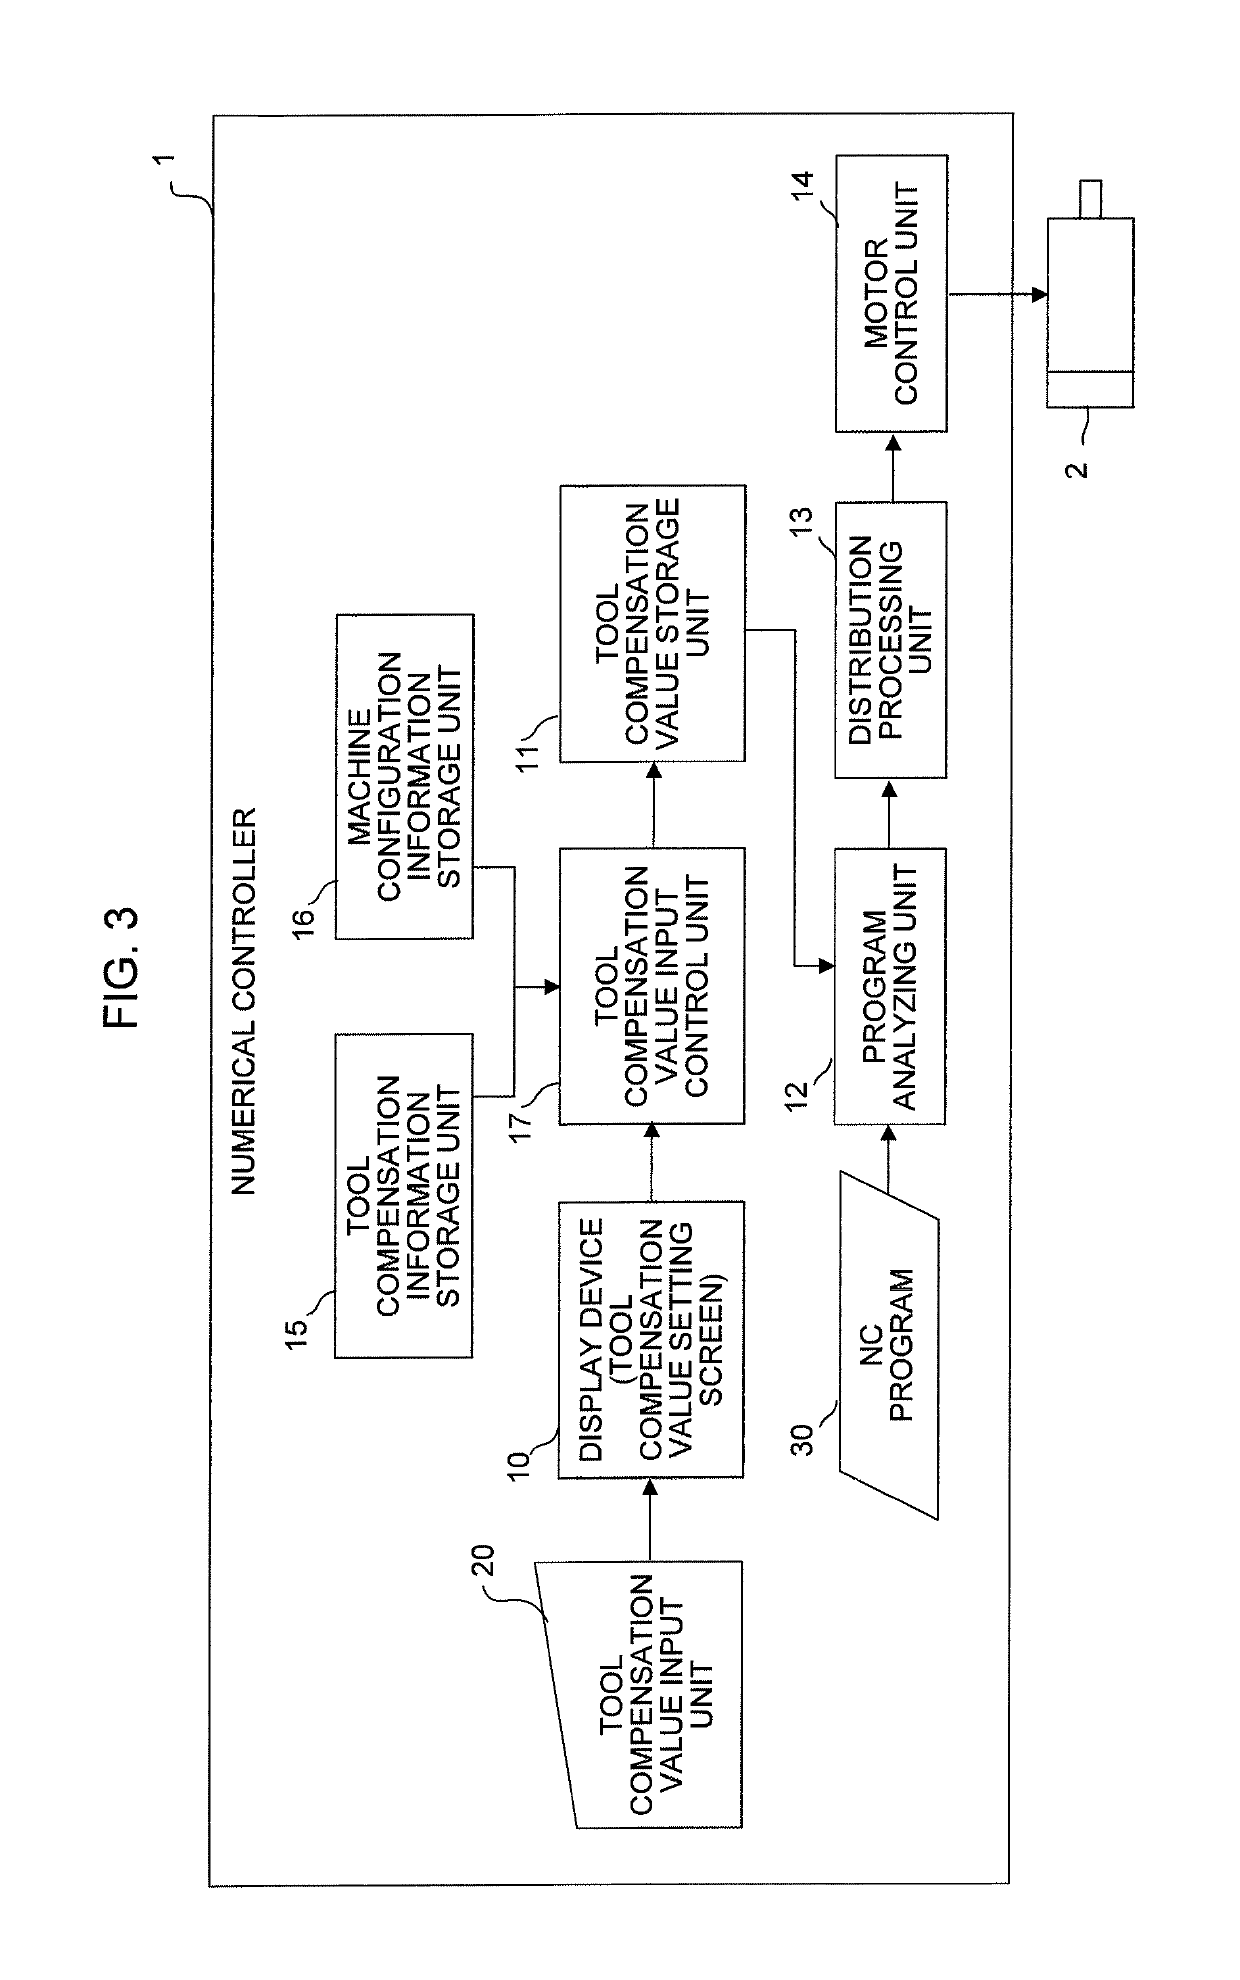 Numerical controller that prevents a tool compensation value setting error